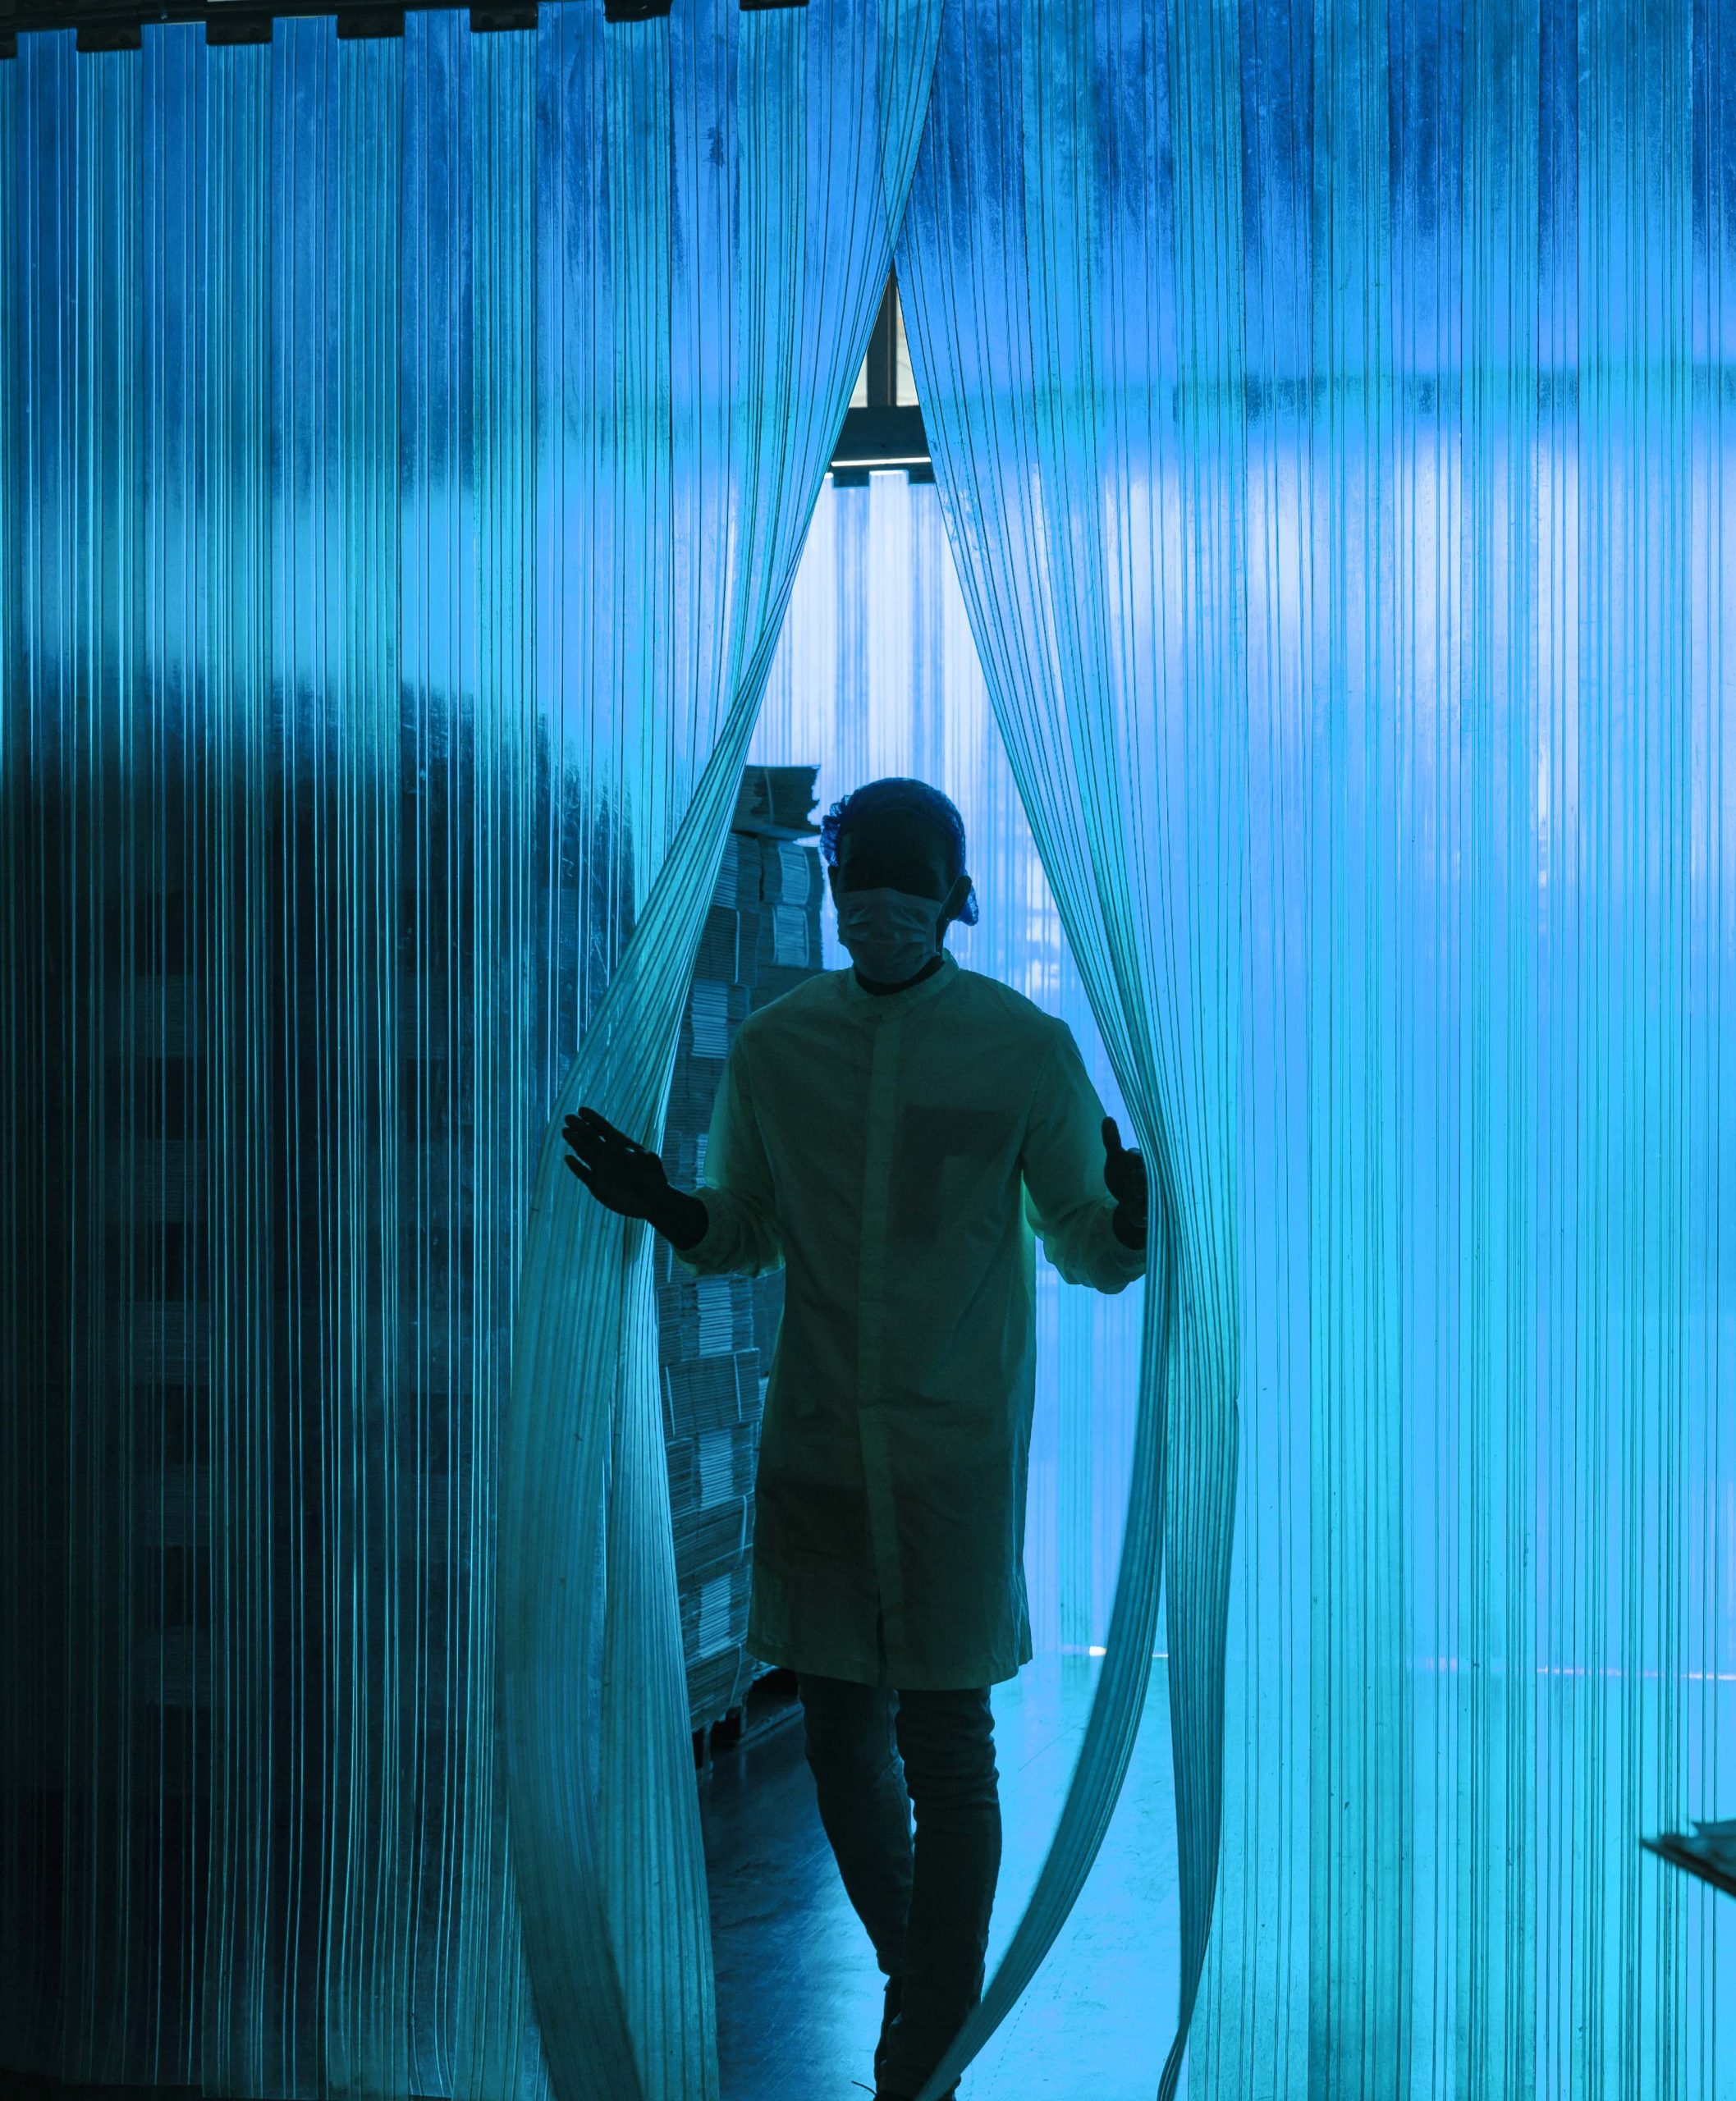 ribbed PVC strip curtains with person walking through